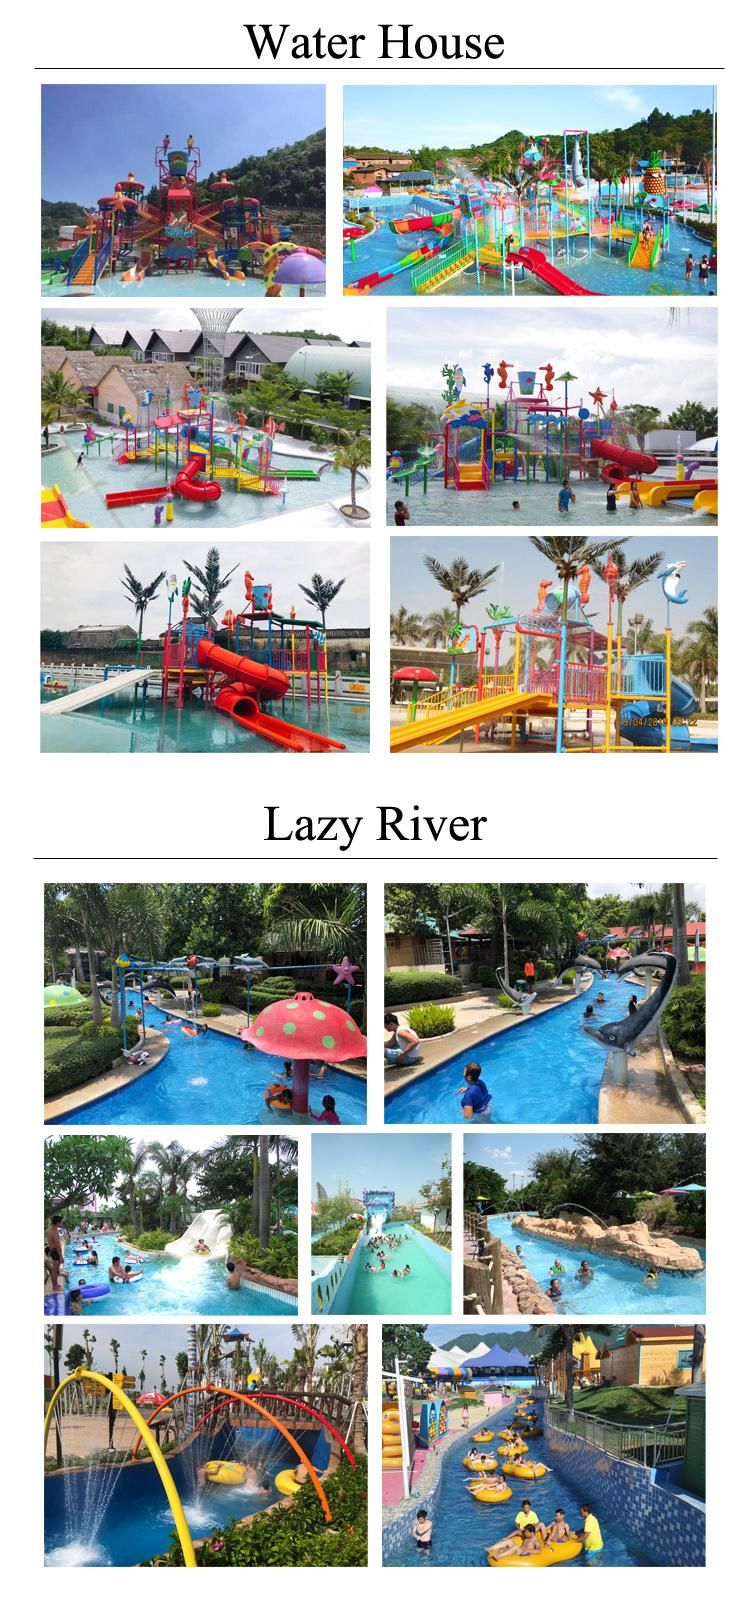 Water Spray Park Toy Aqua Park Equipment Small Water Games